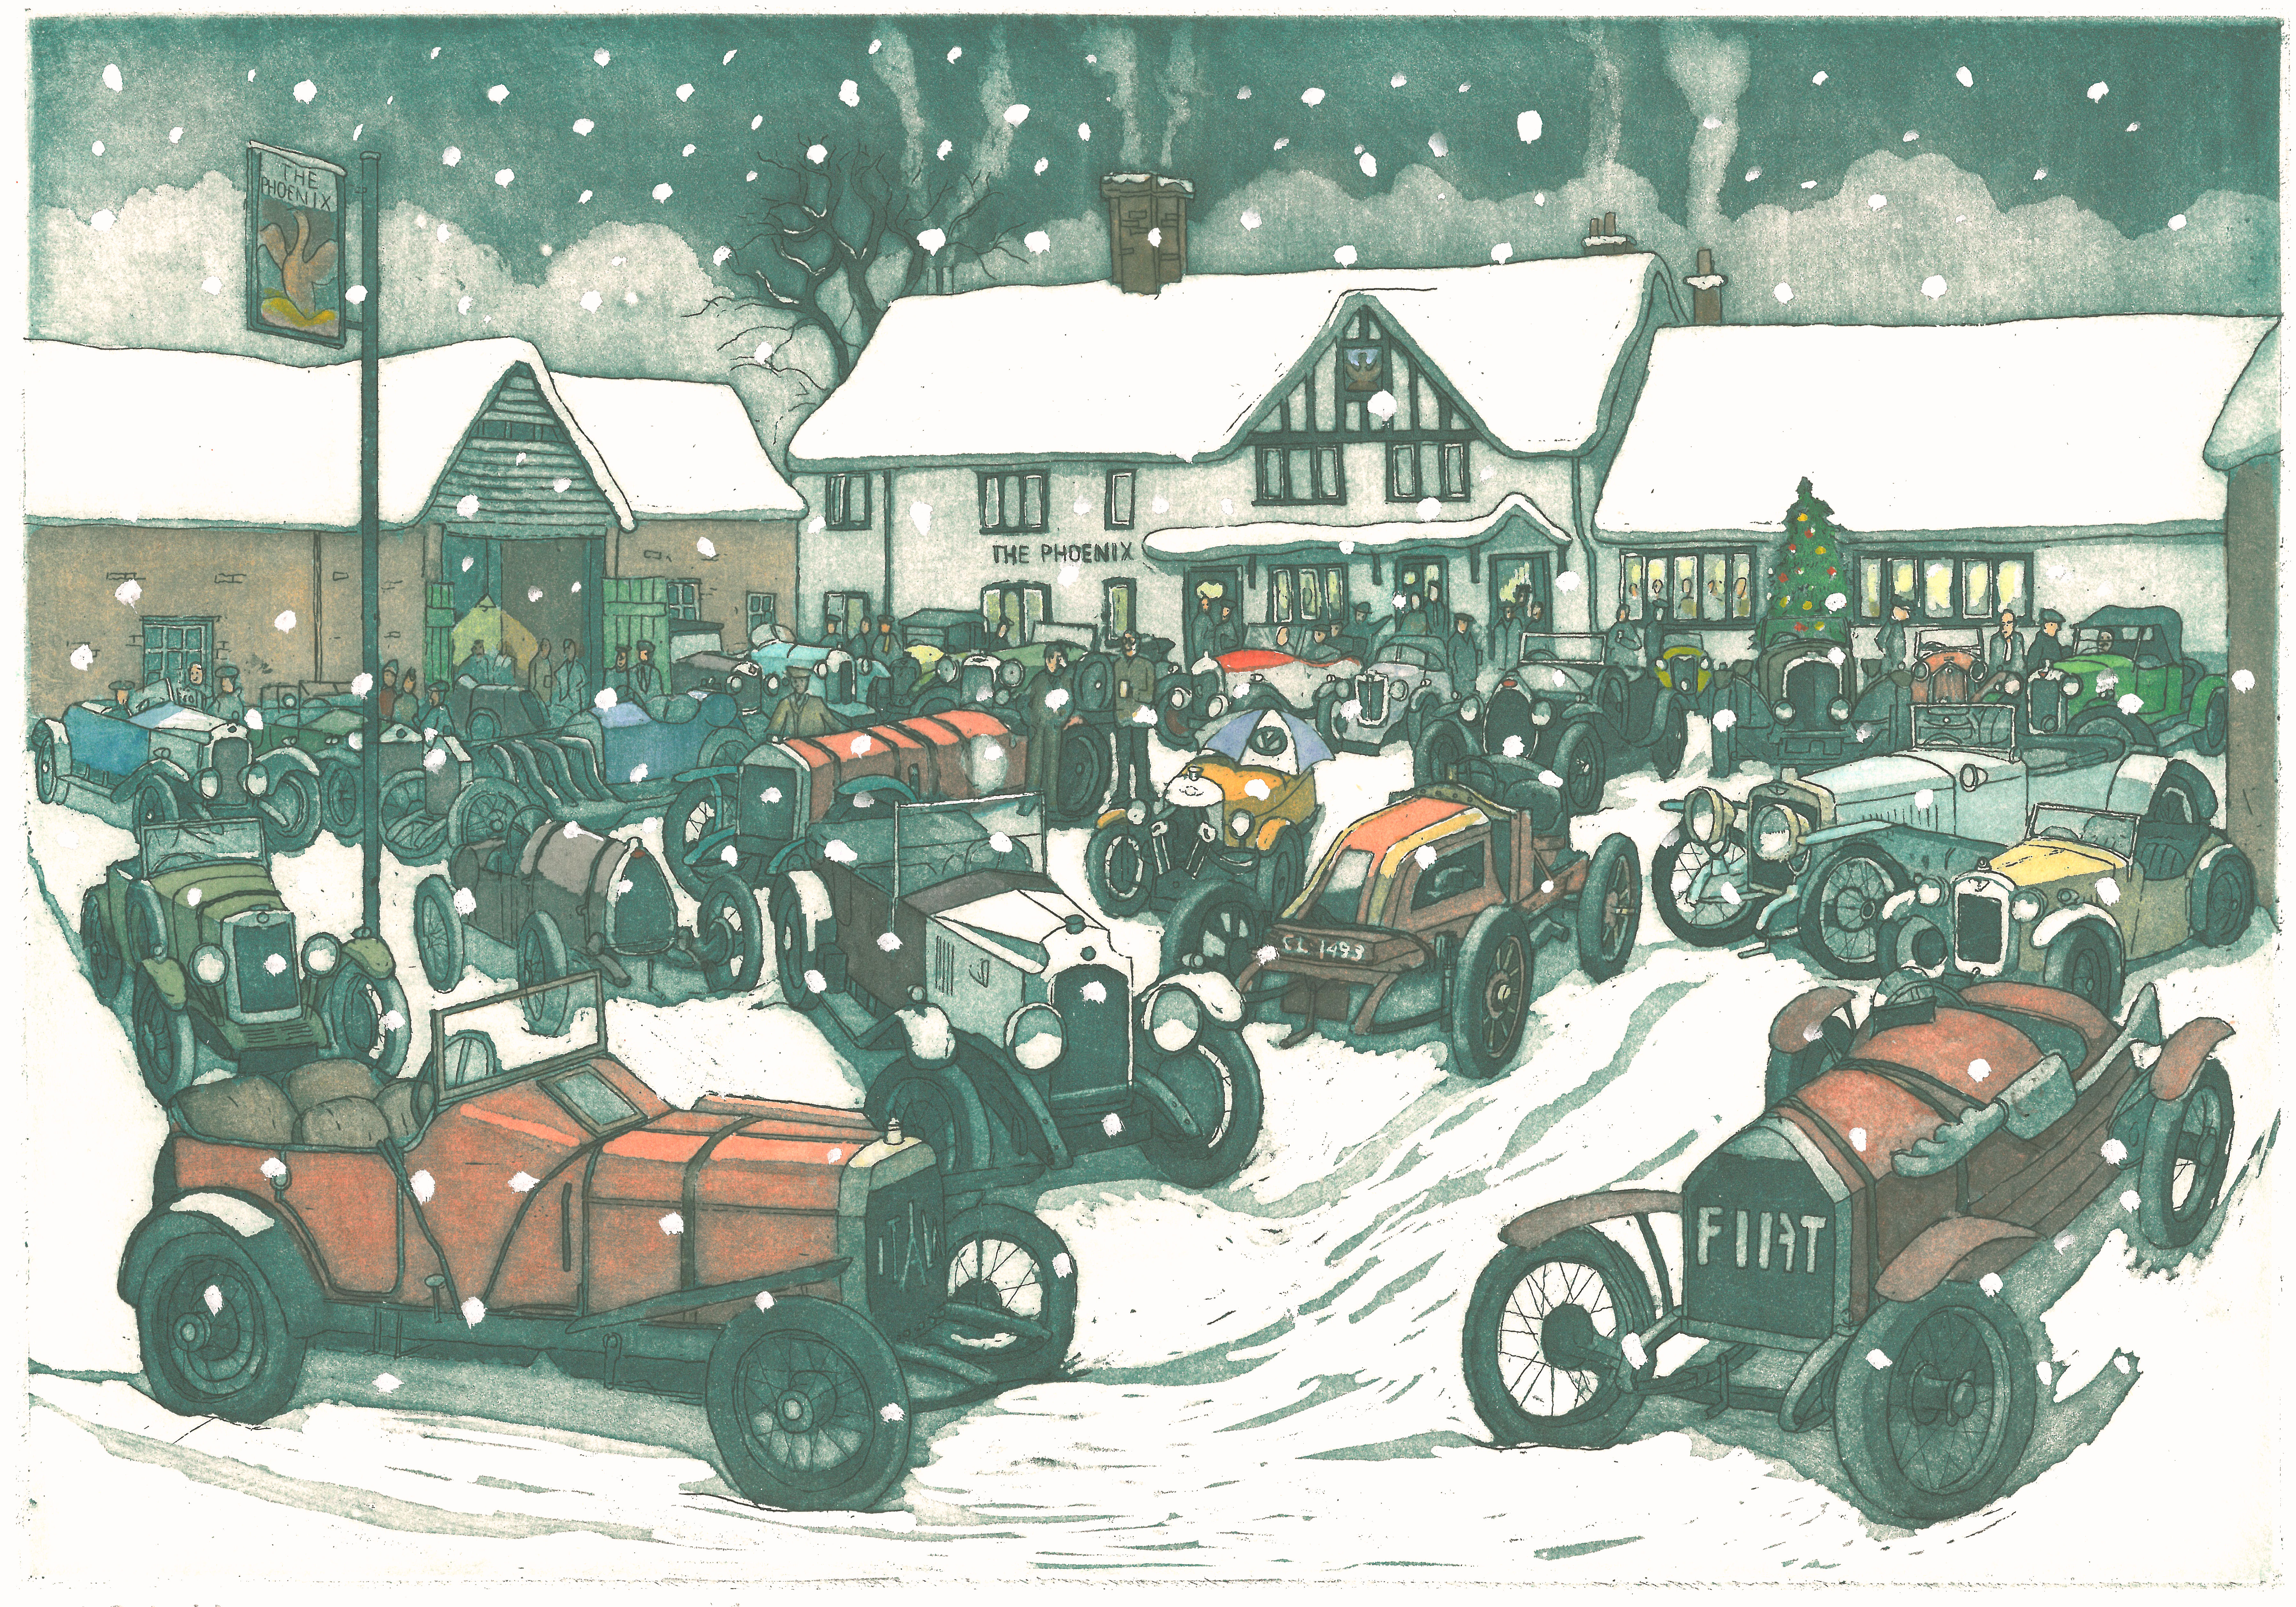 Richard Wade 2013 VSCC Christmas Card now available cover